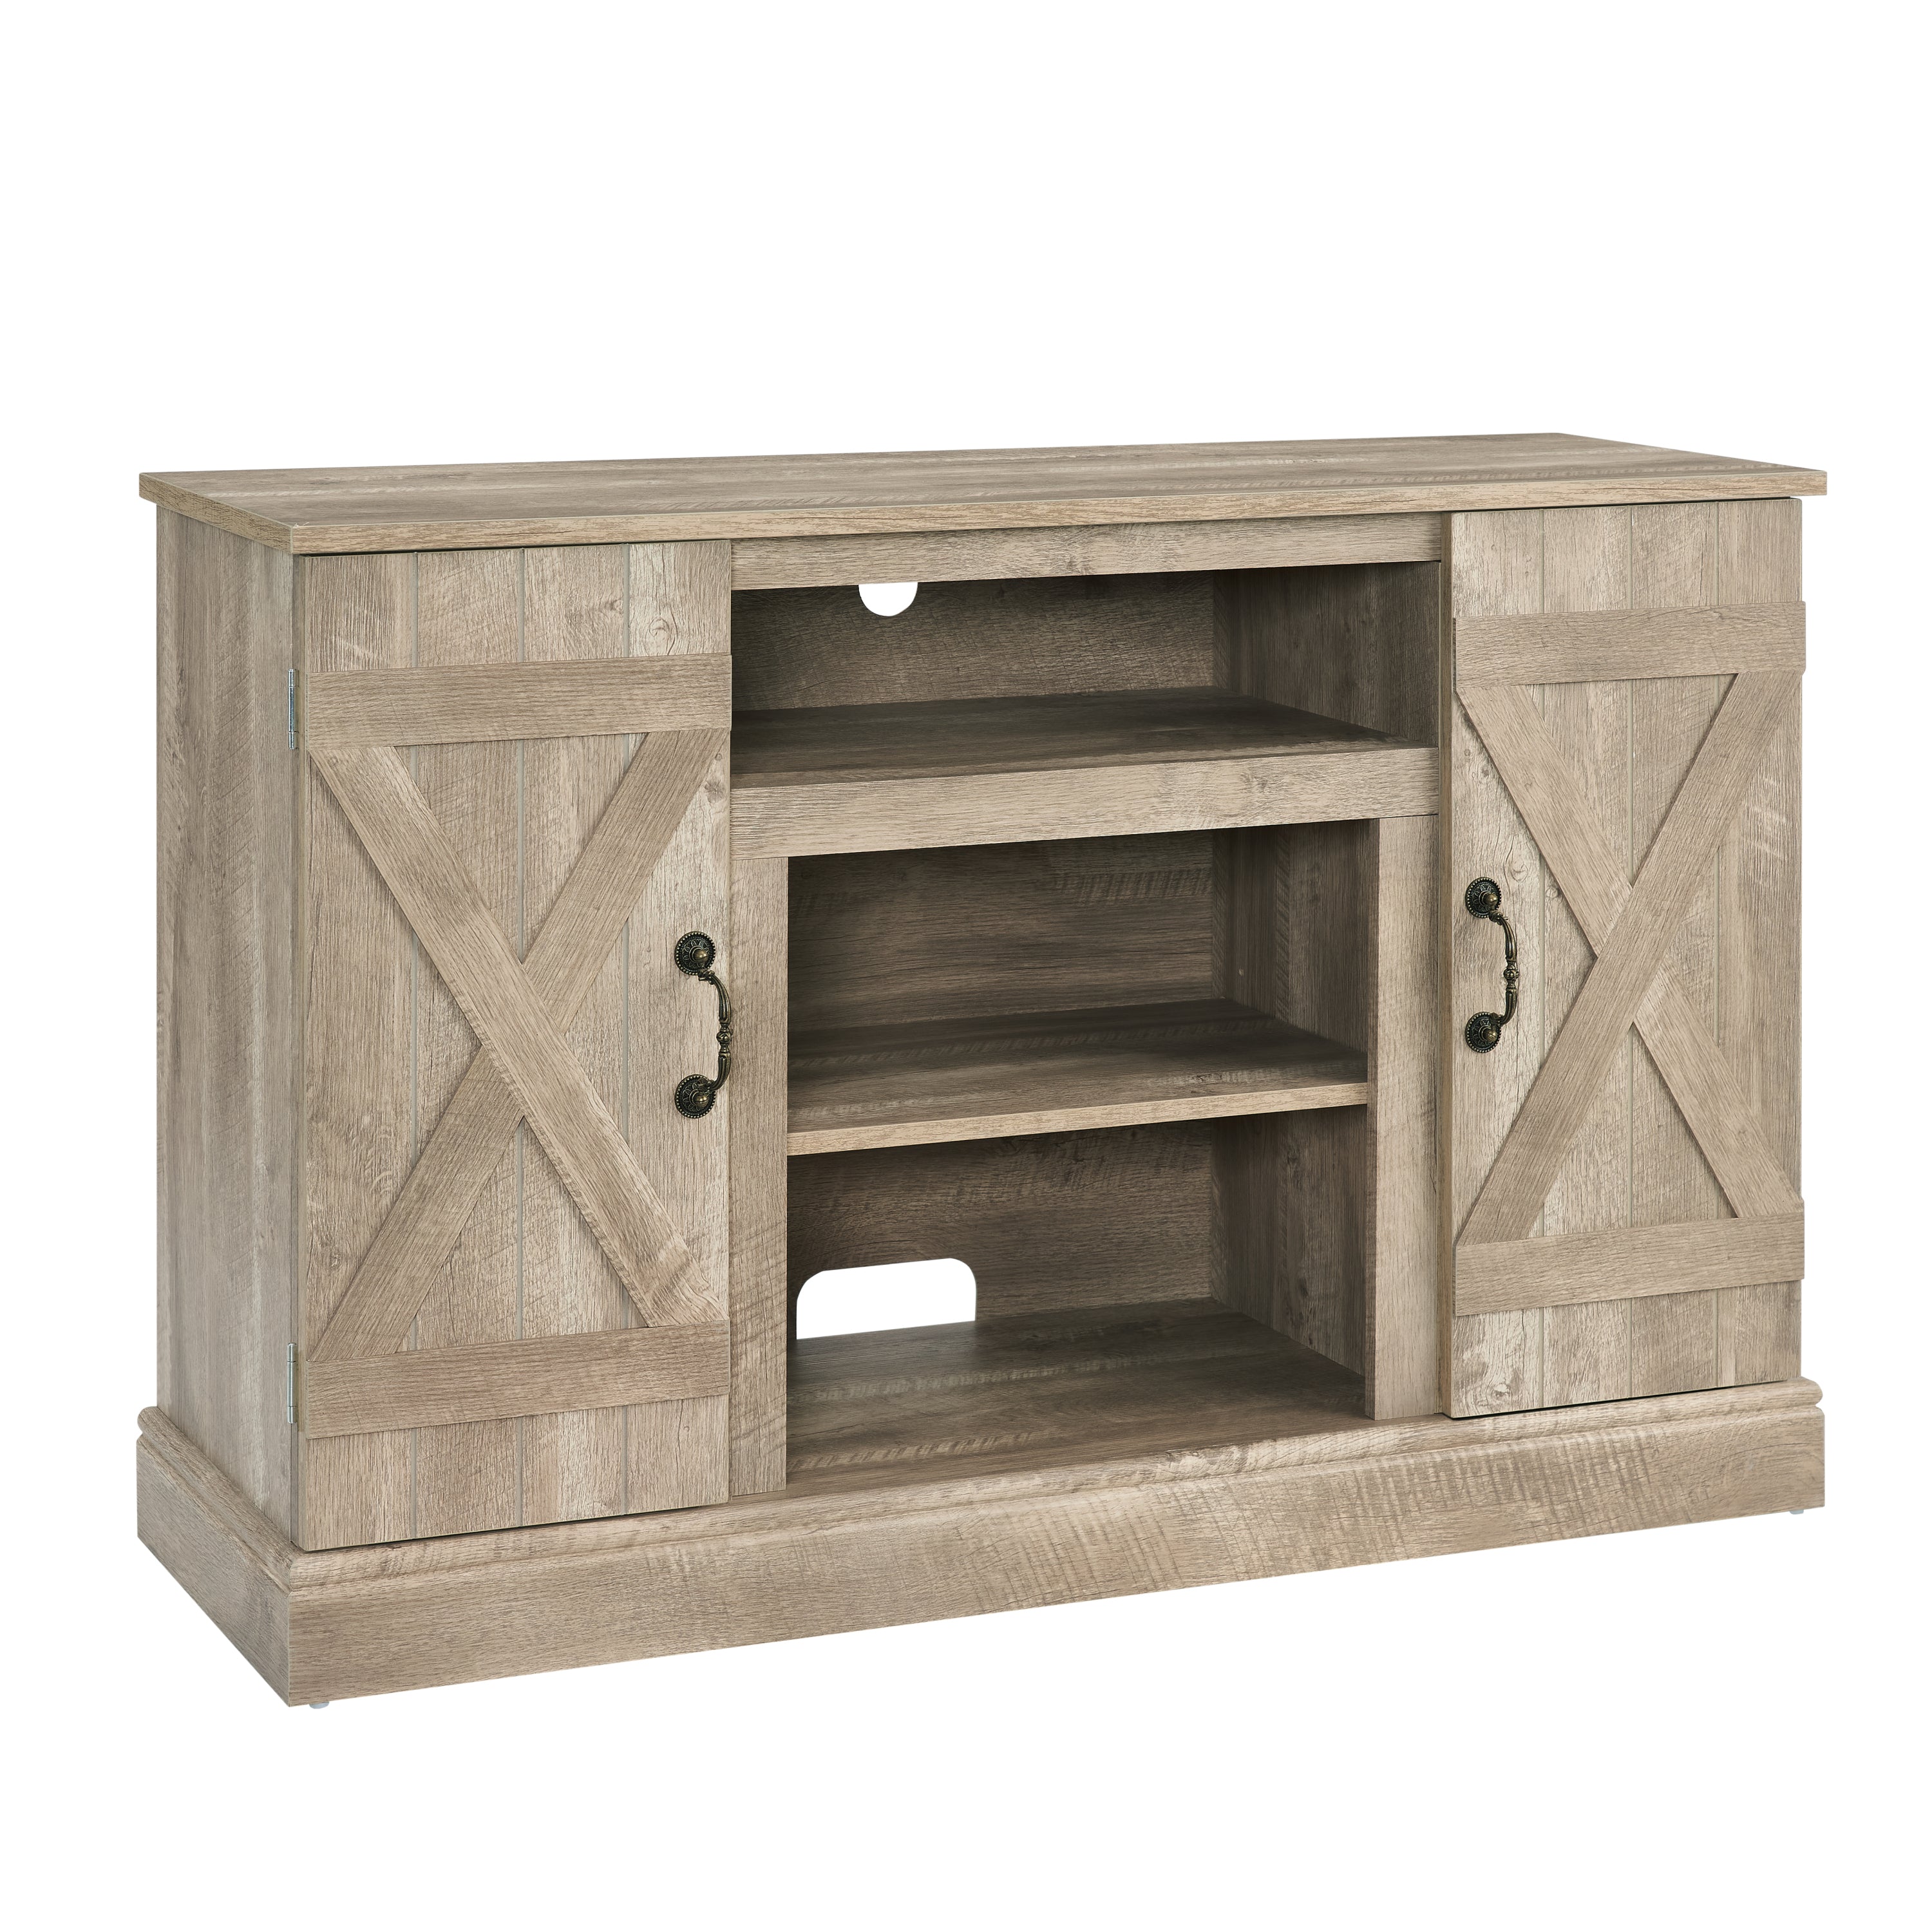 Farmhouse Classic TV Stand Antique Entertainment Console for TV up to 50" with Open and Closed Storage Space, Ashland Pine